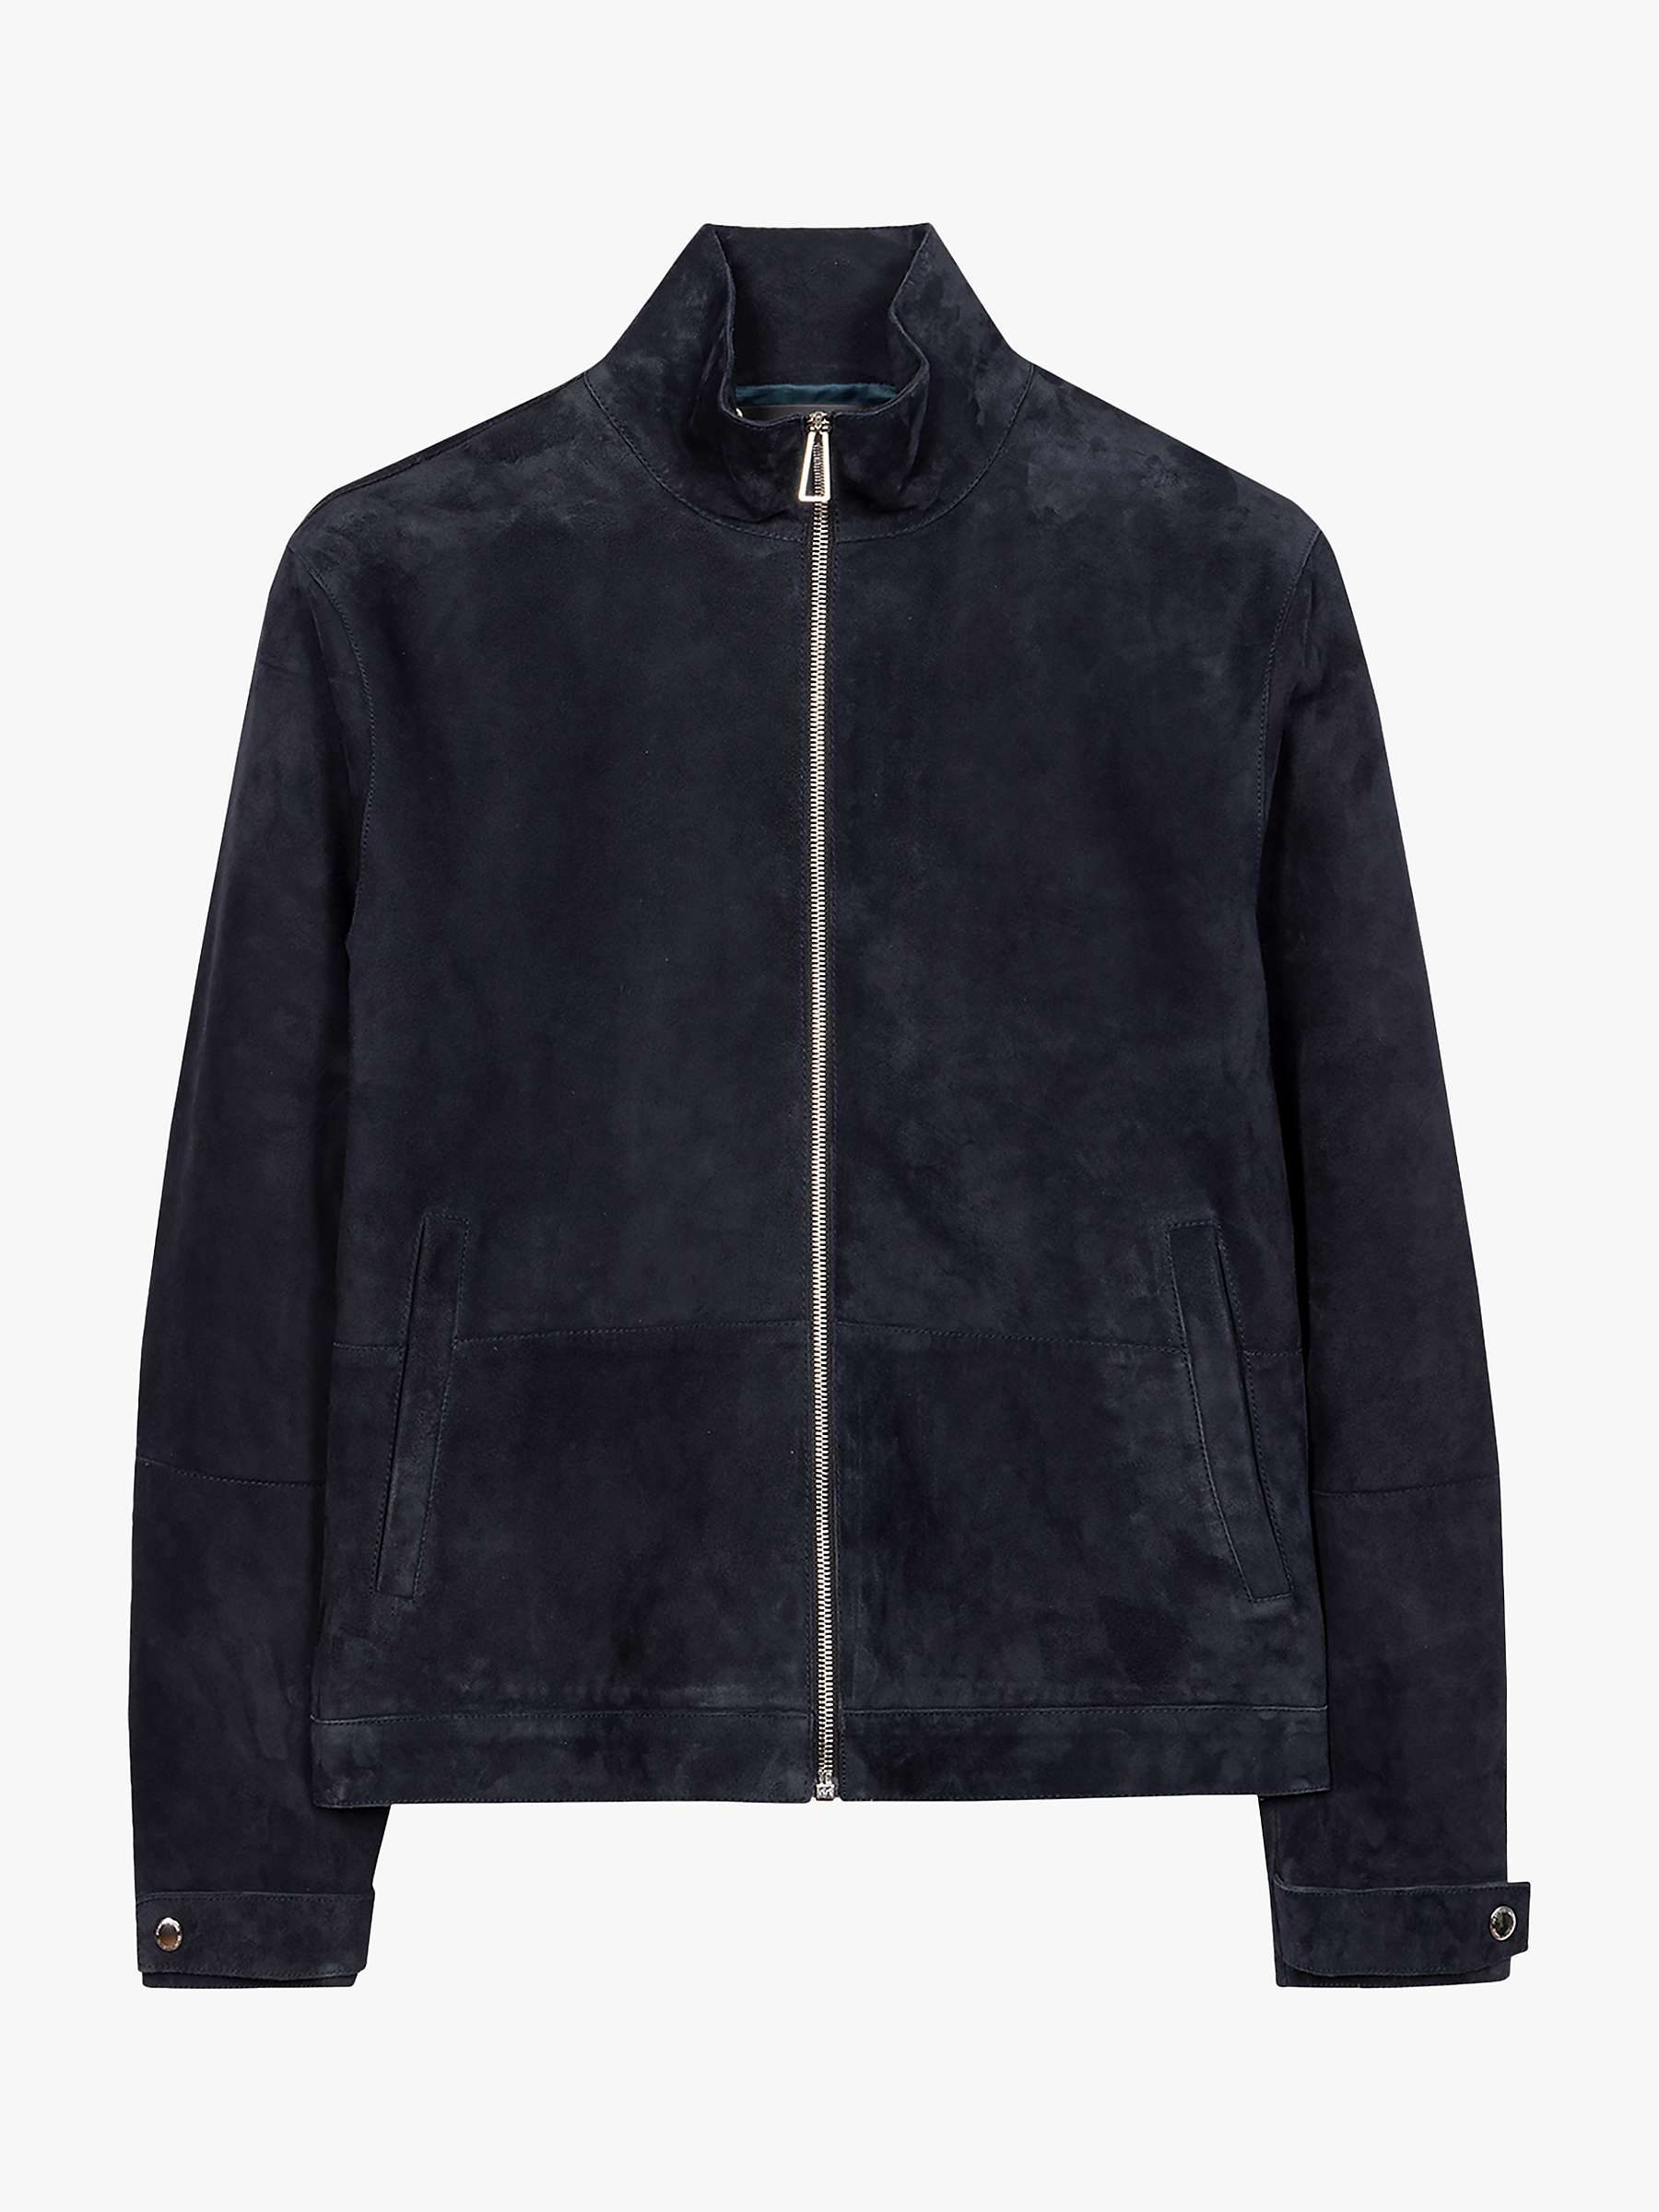 Buy Paul Smith Suede Jacket, Navy Online at johnlewis.com